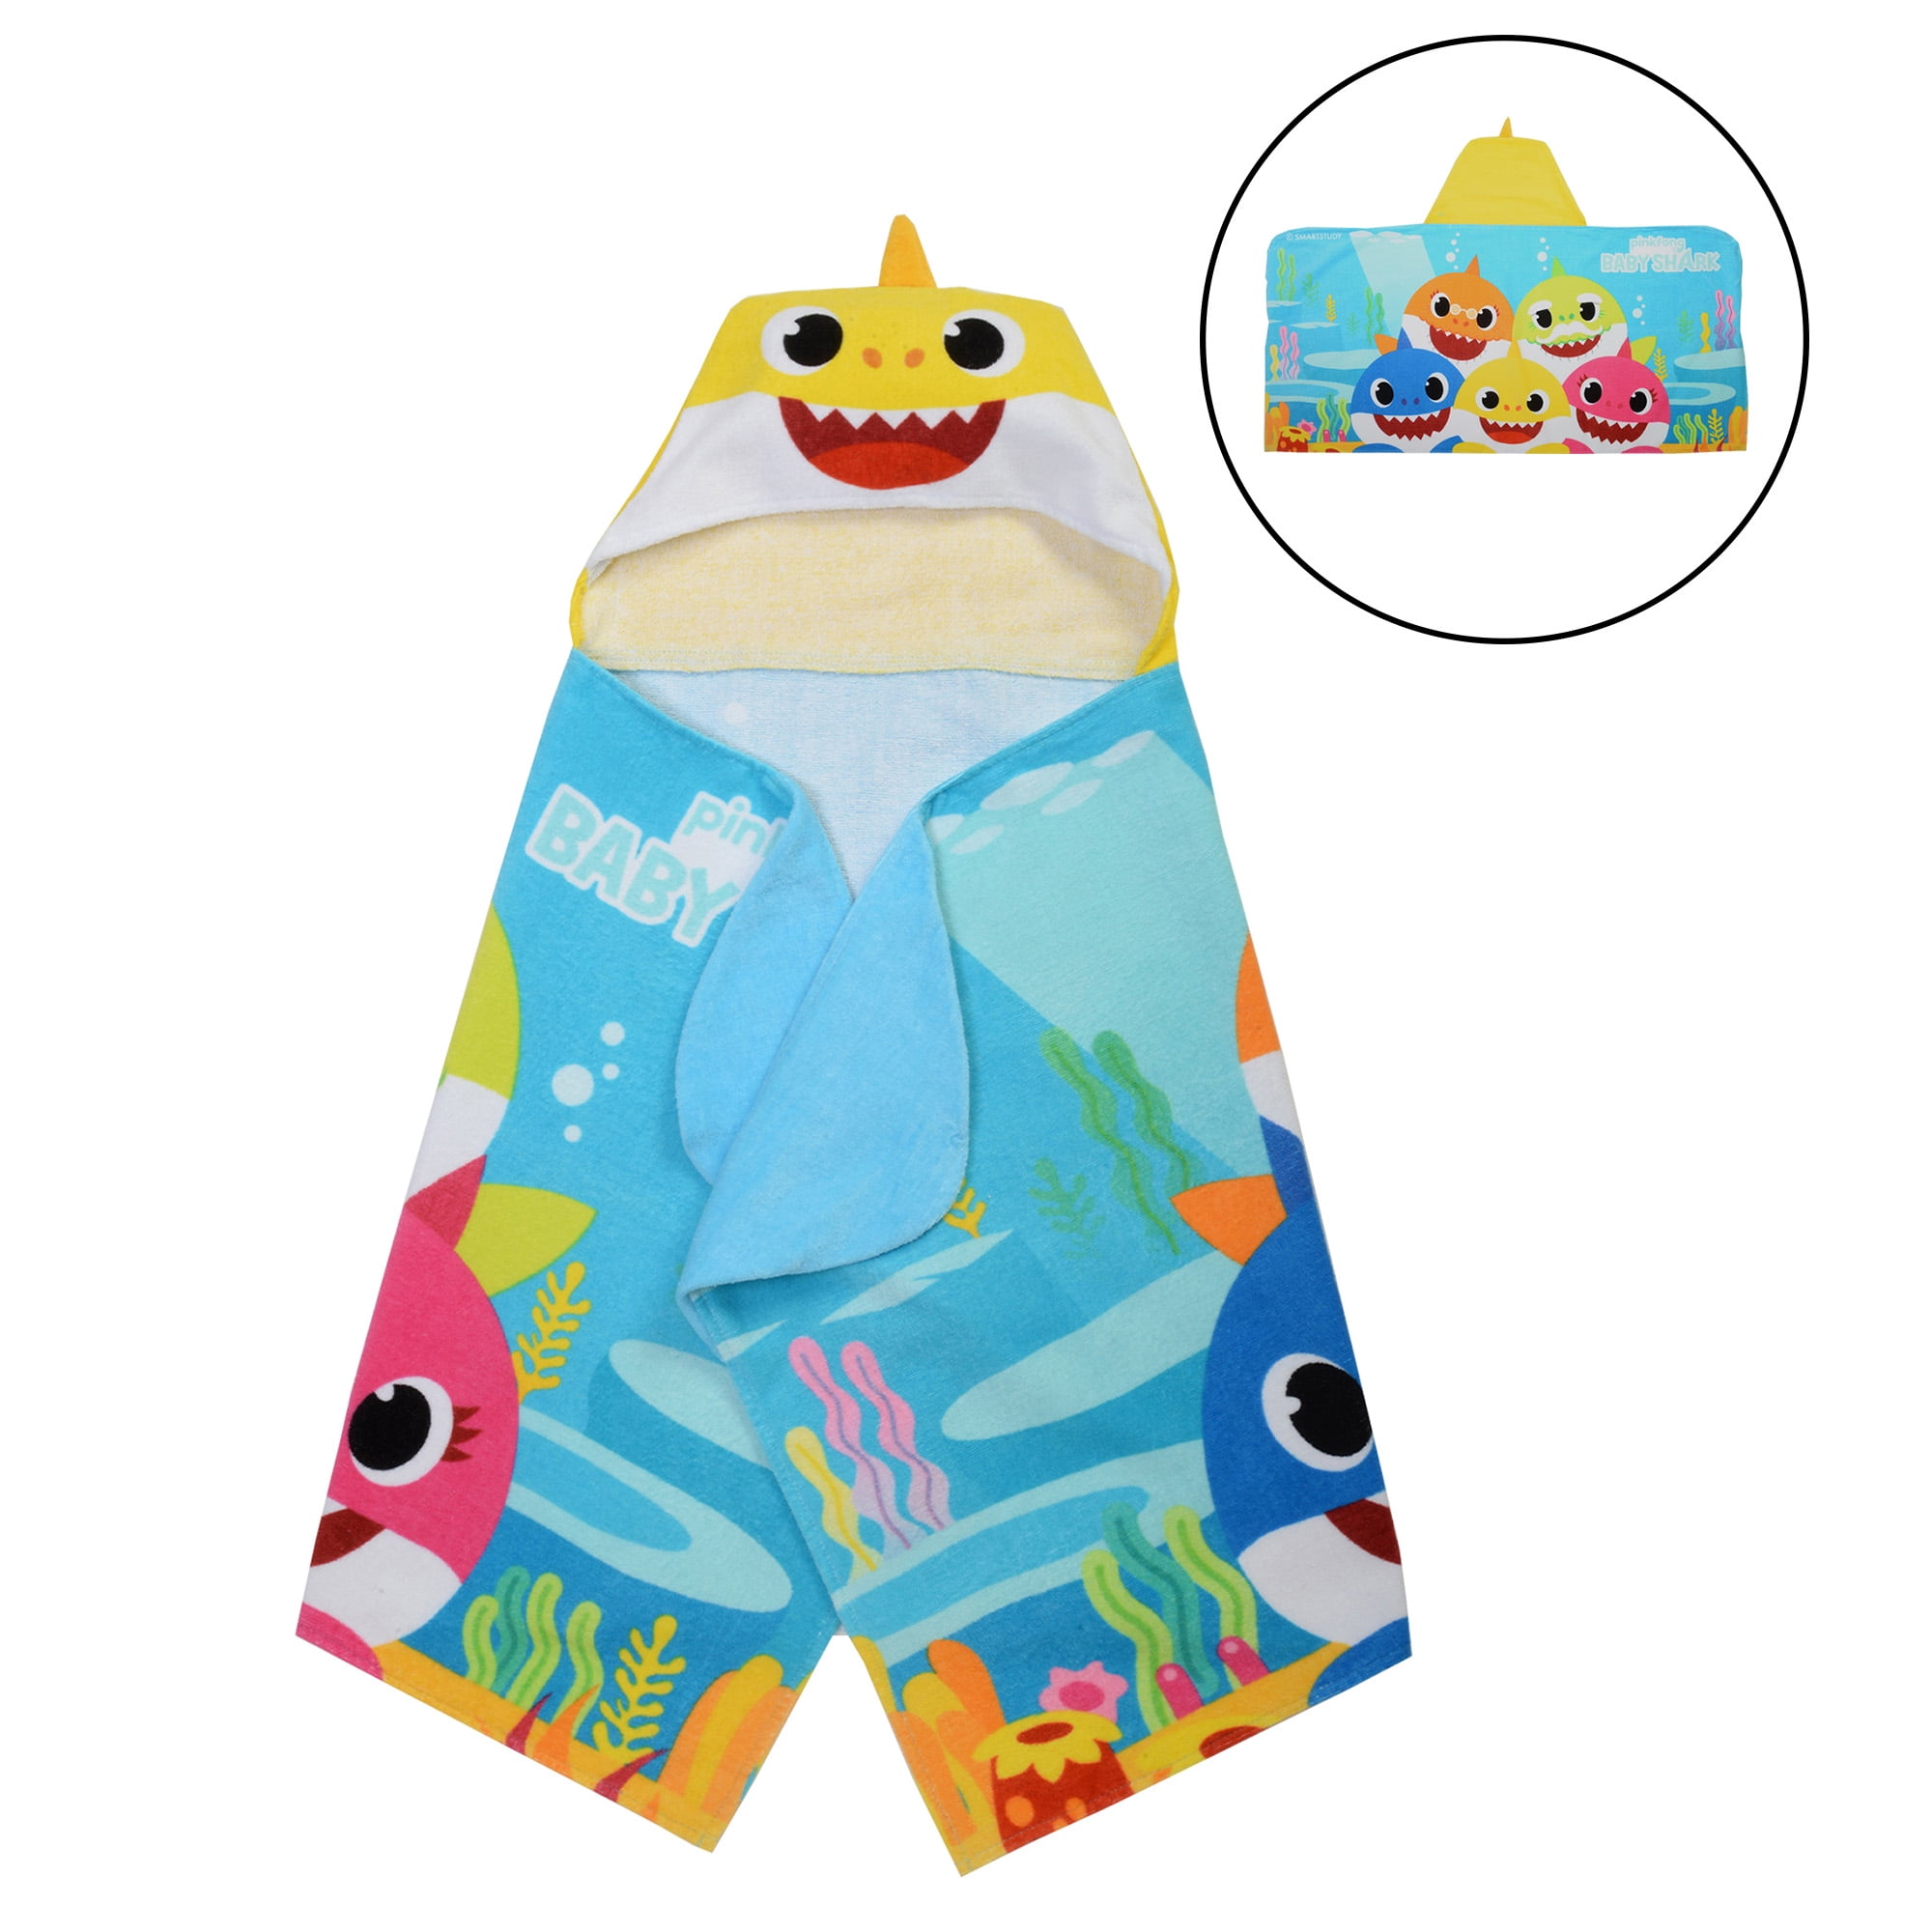 Jumping Beans Kids Hooded Bath Wrap Multiple Designs cotton new 